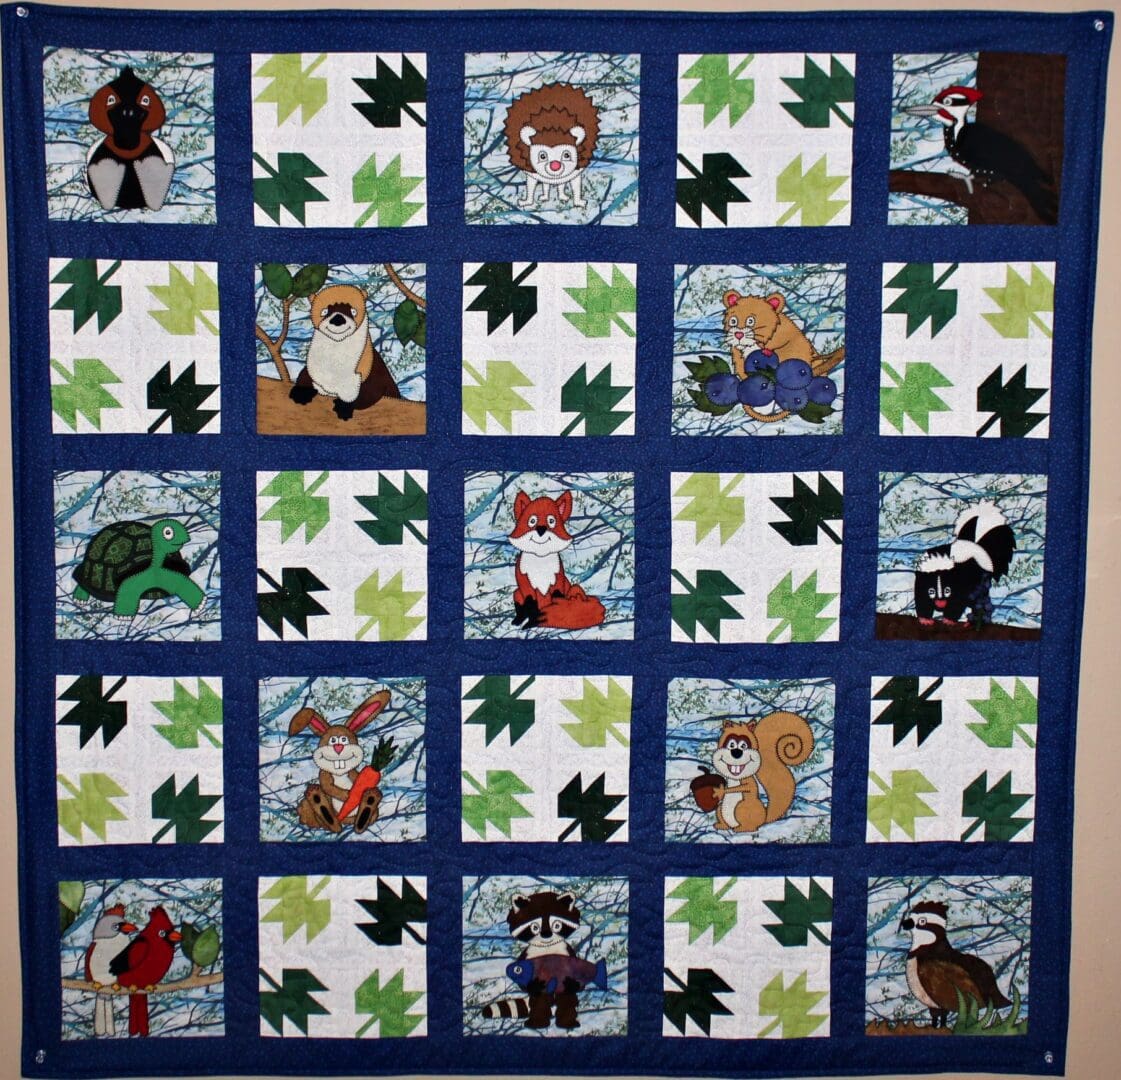 A quilt with pictures of animals and leaves.